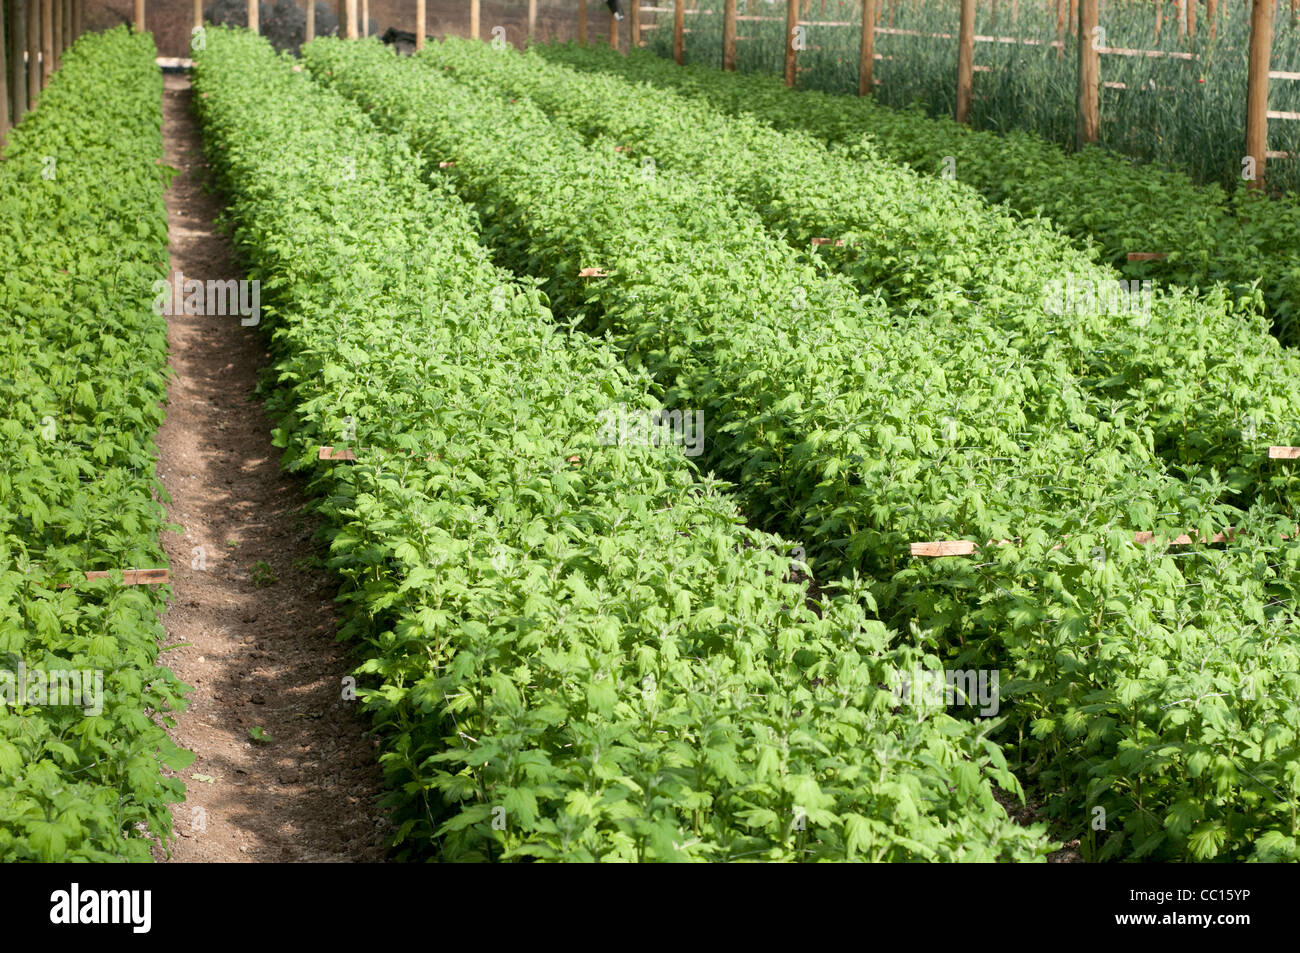 greenhouse young flowering plants Stock Photo